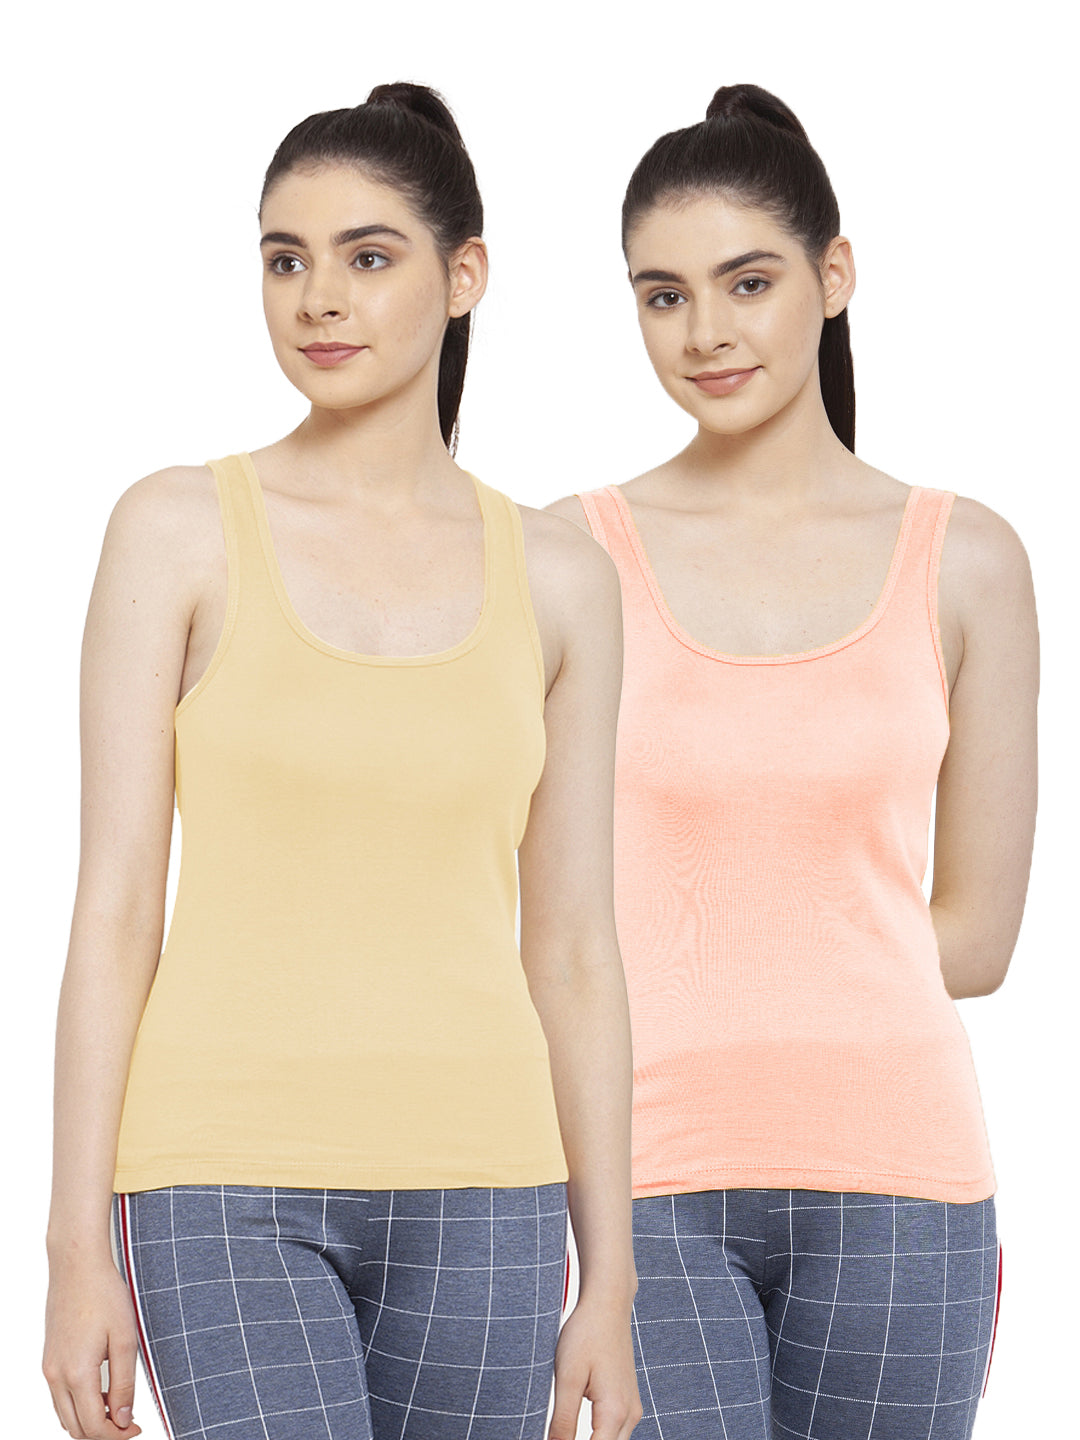 Women Pack Of 2 Skin & Peach Ultimate Active Tank Top - Friskers